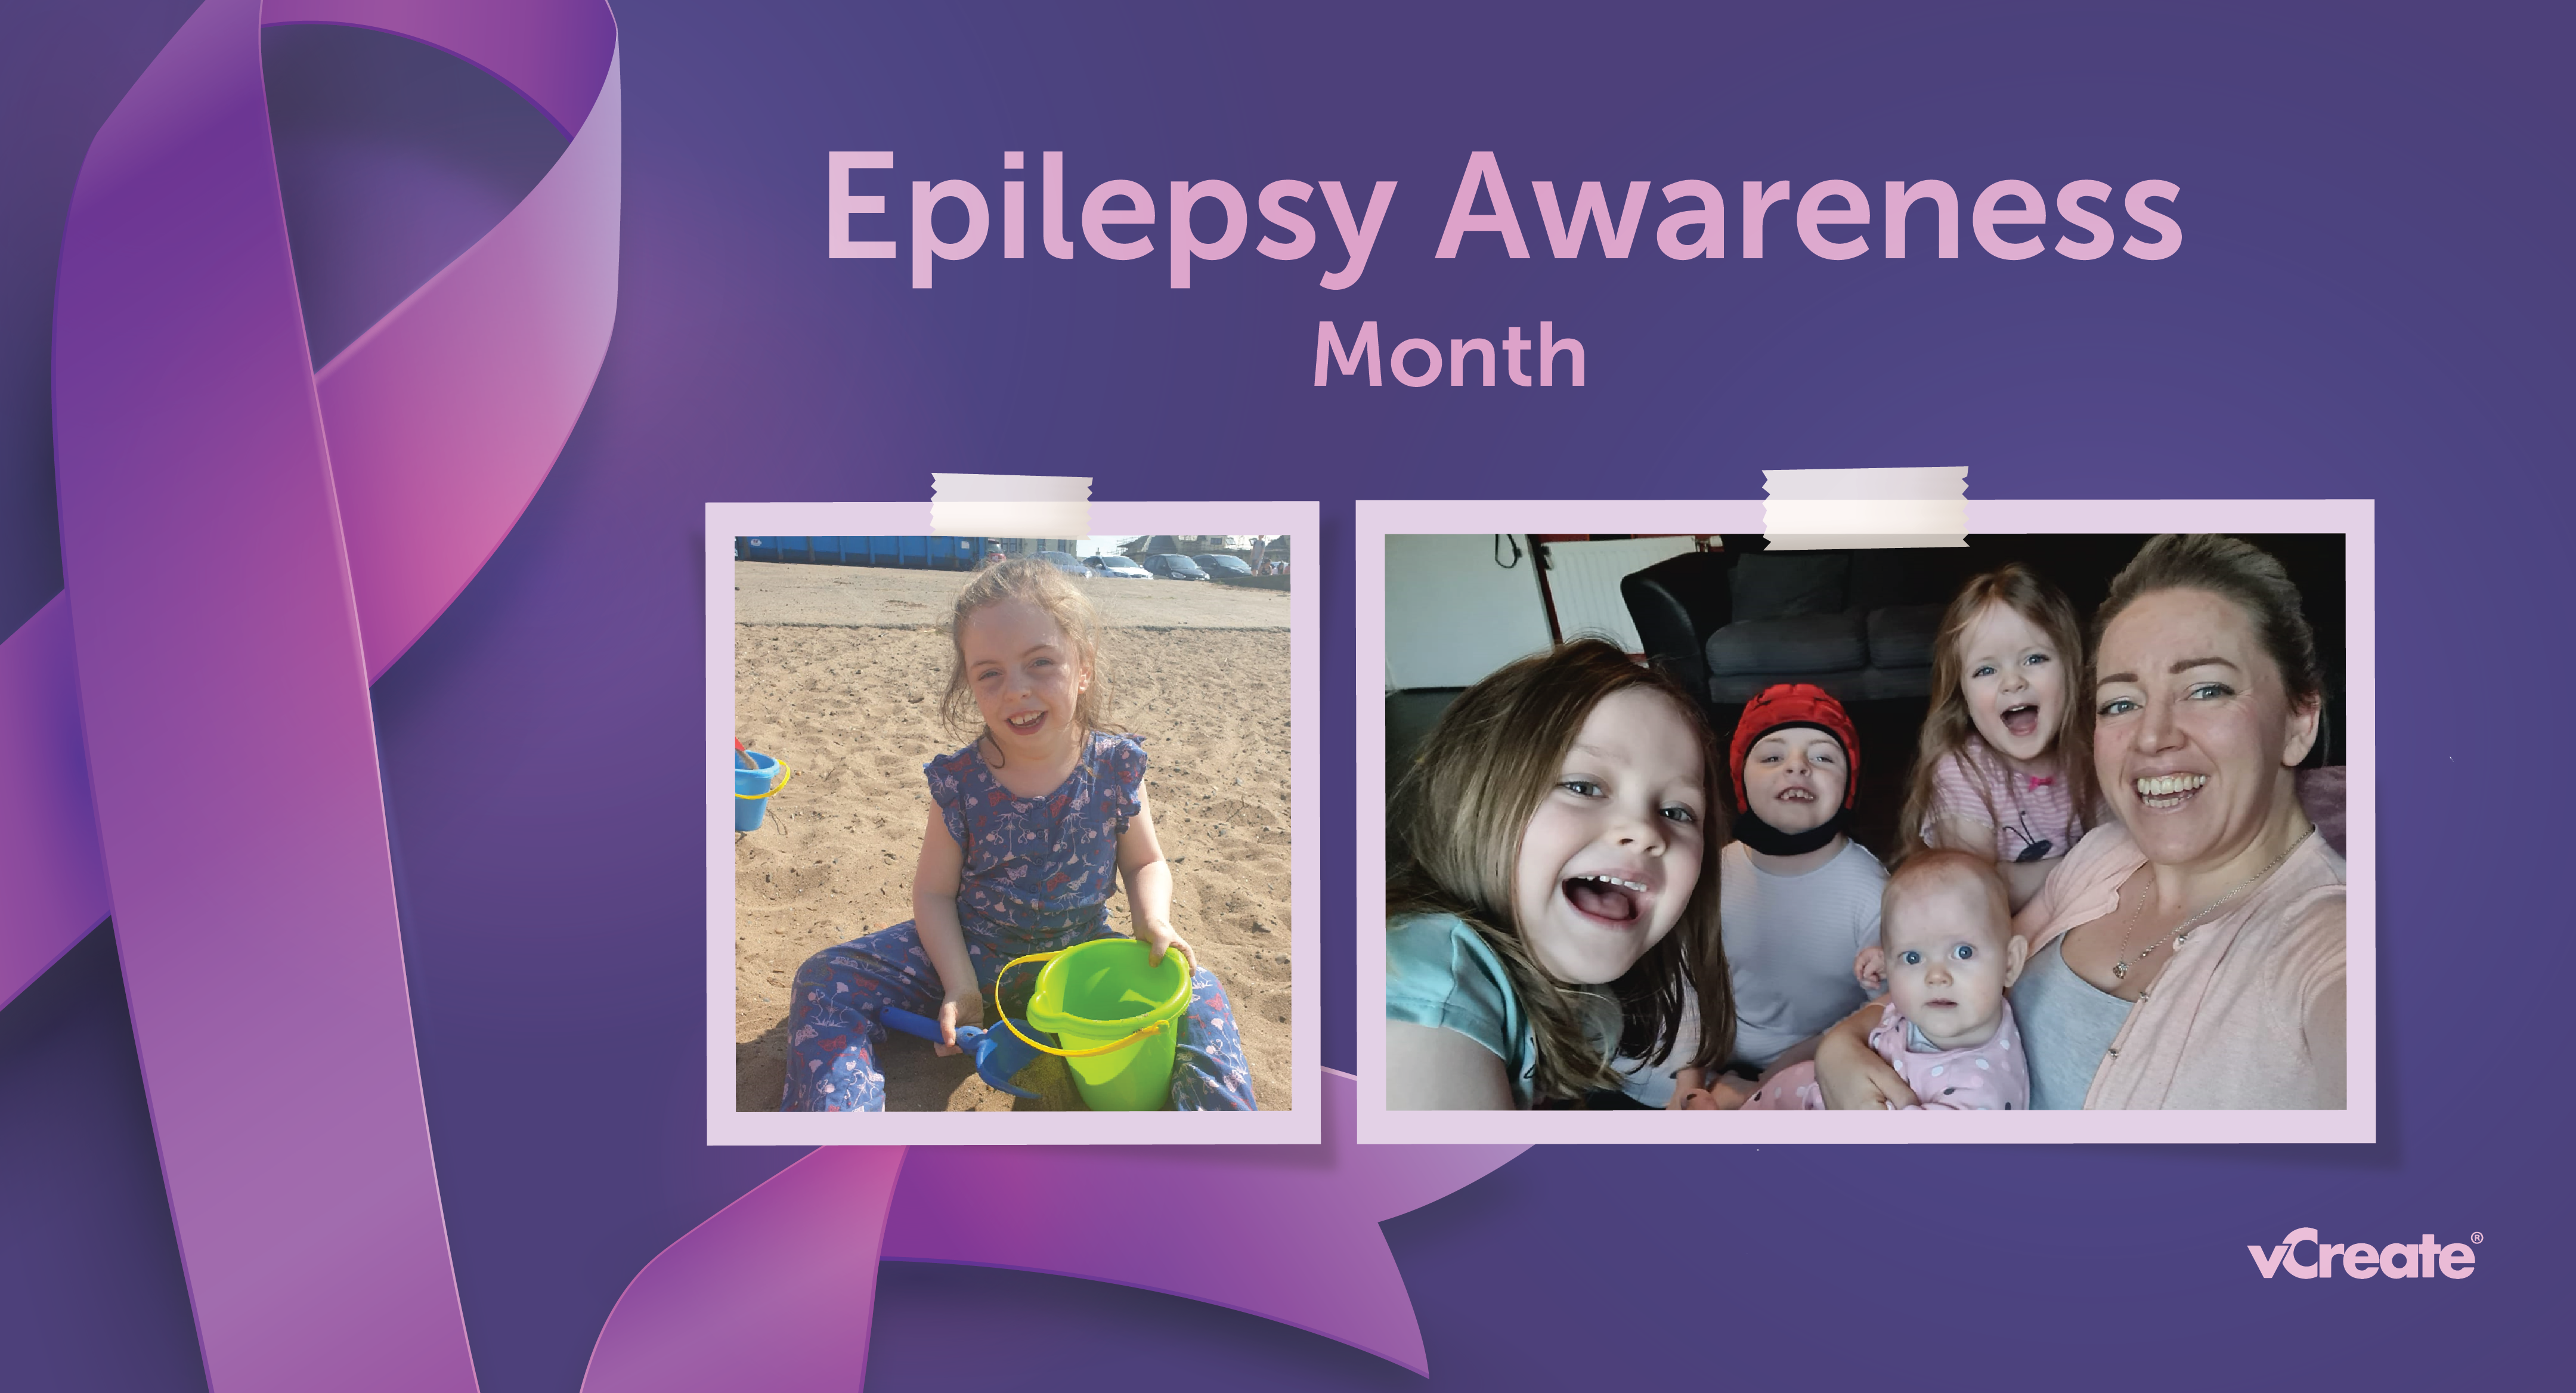 Mother of 4, Rebecca, shares her family's epilepsy journey with daughter, Hannah